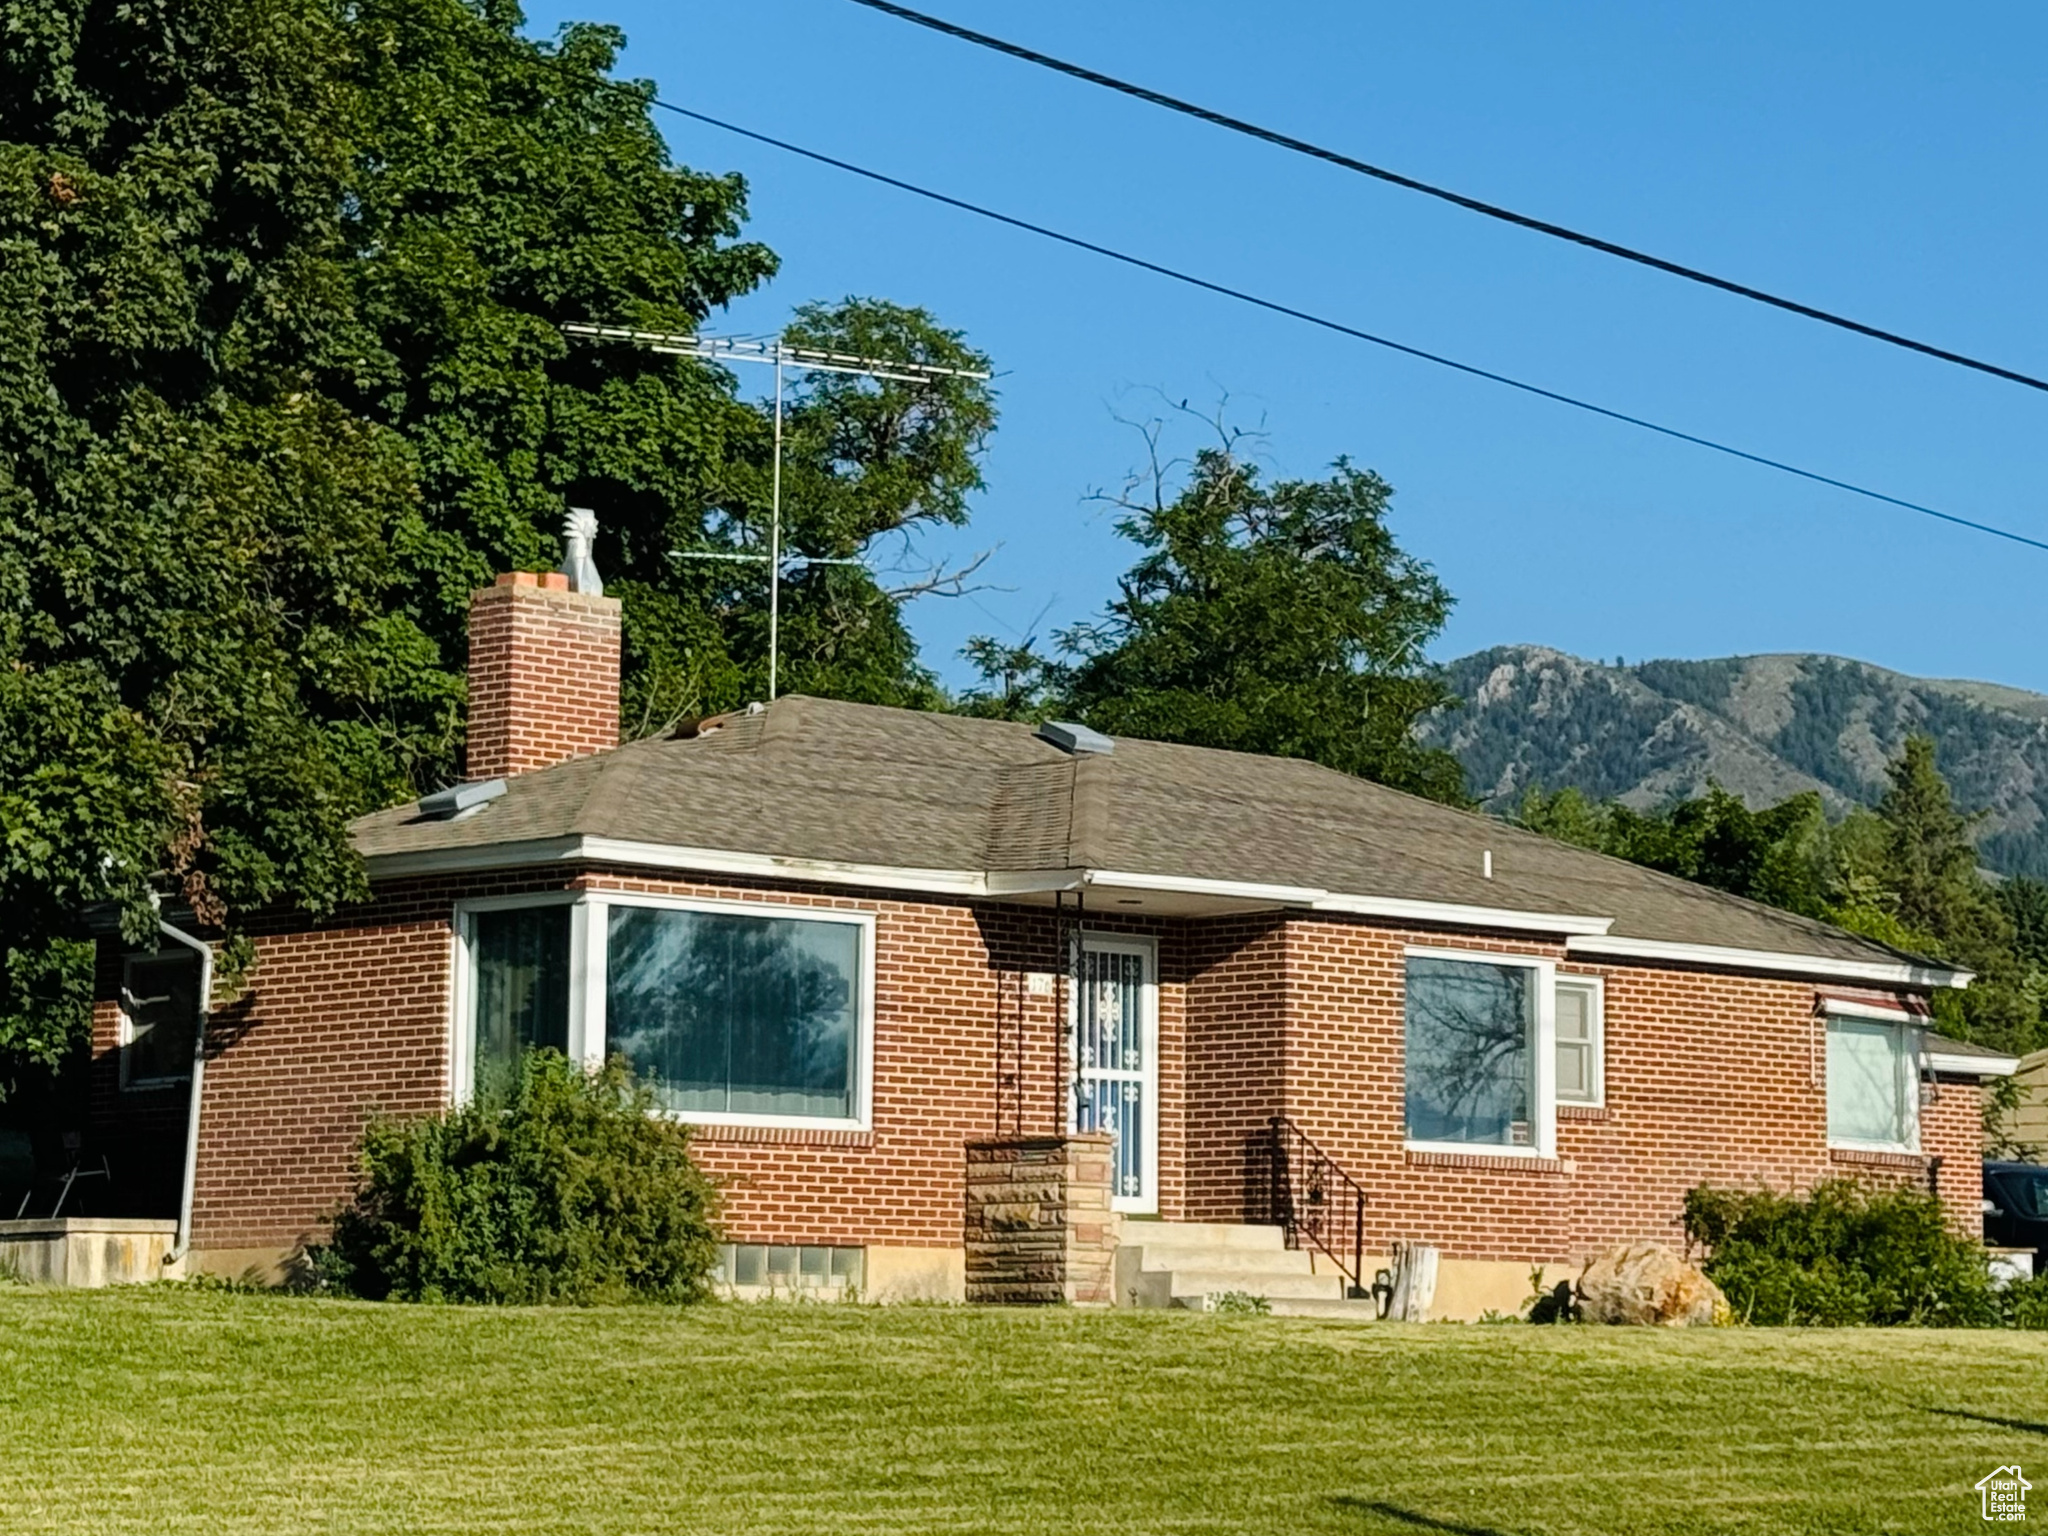 View of front of house with a mountain view and a front lawn